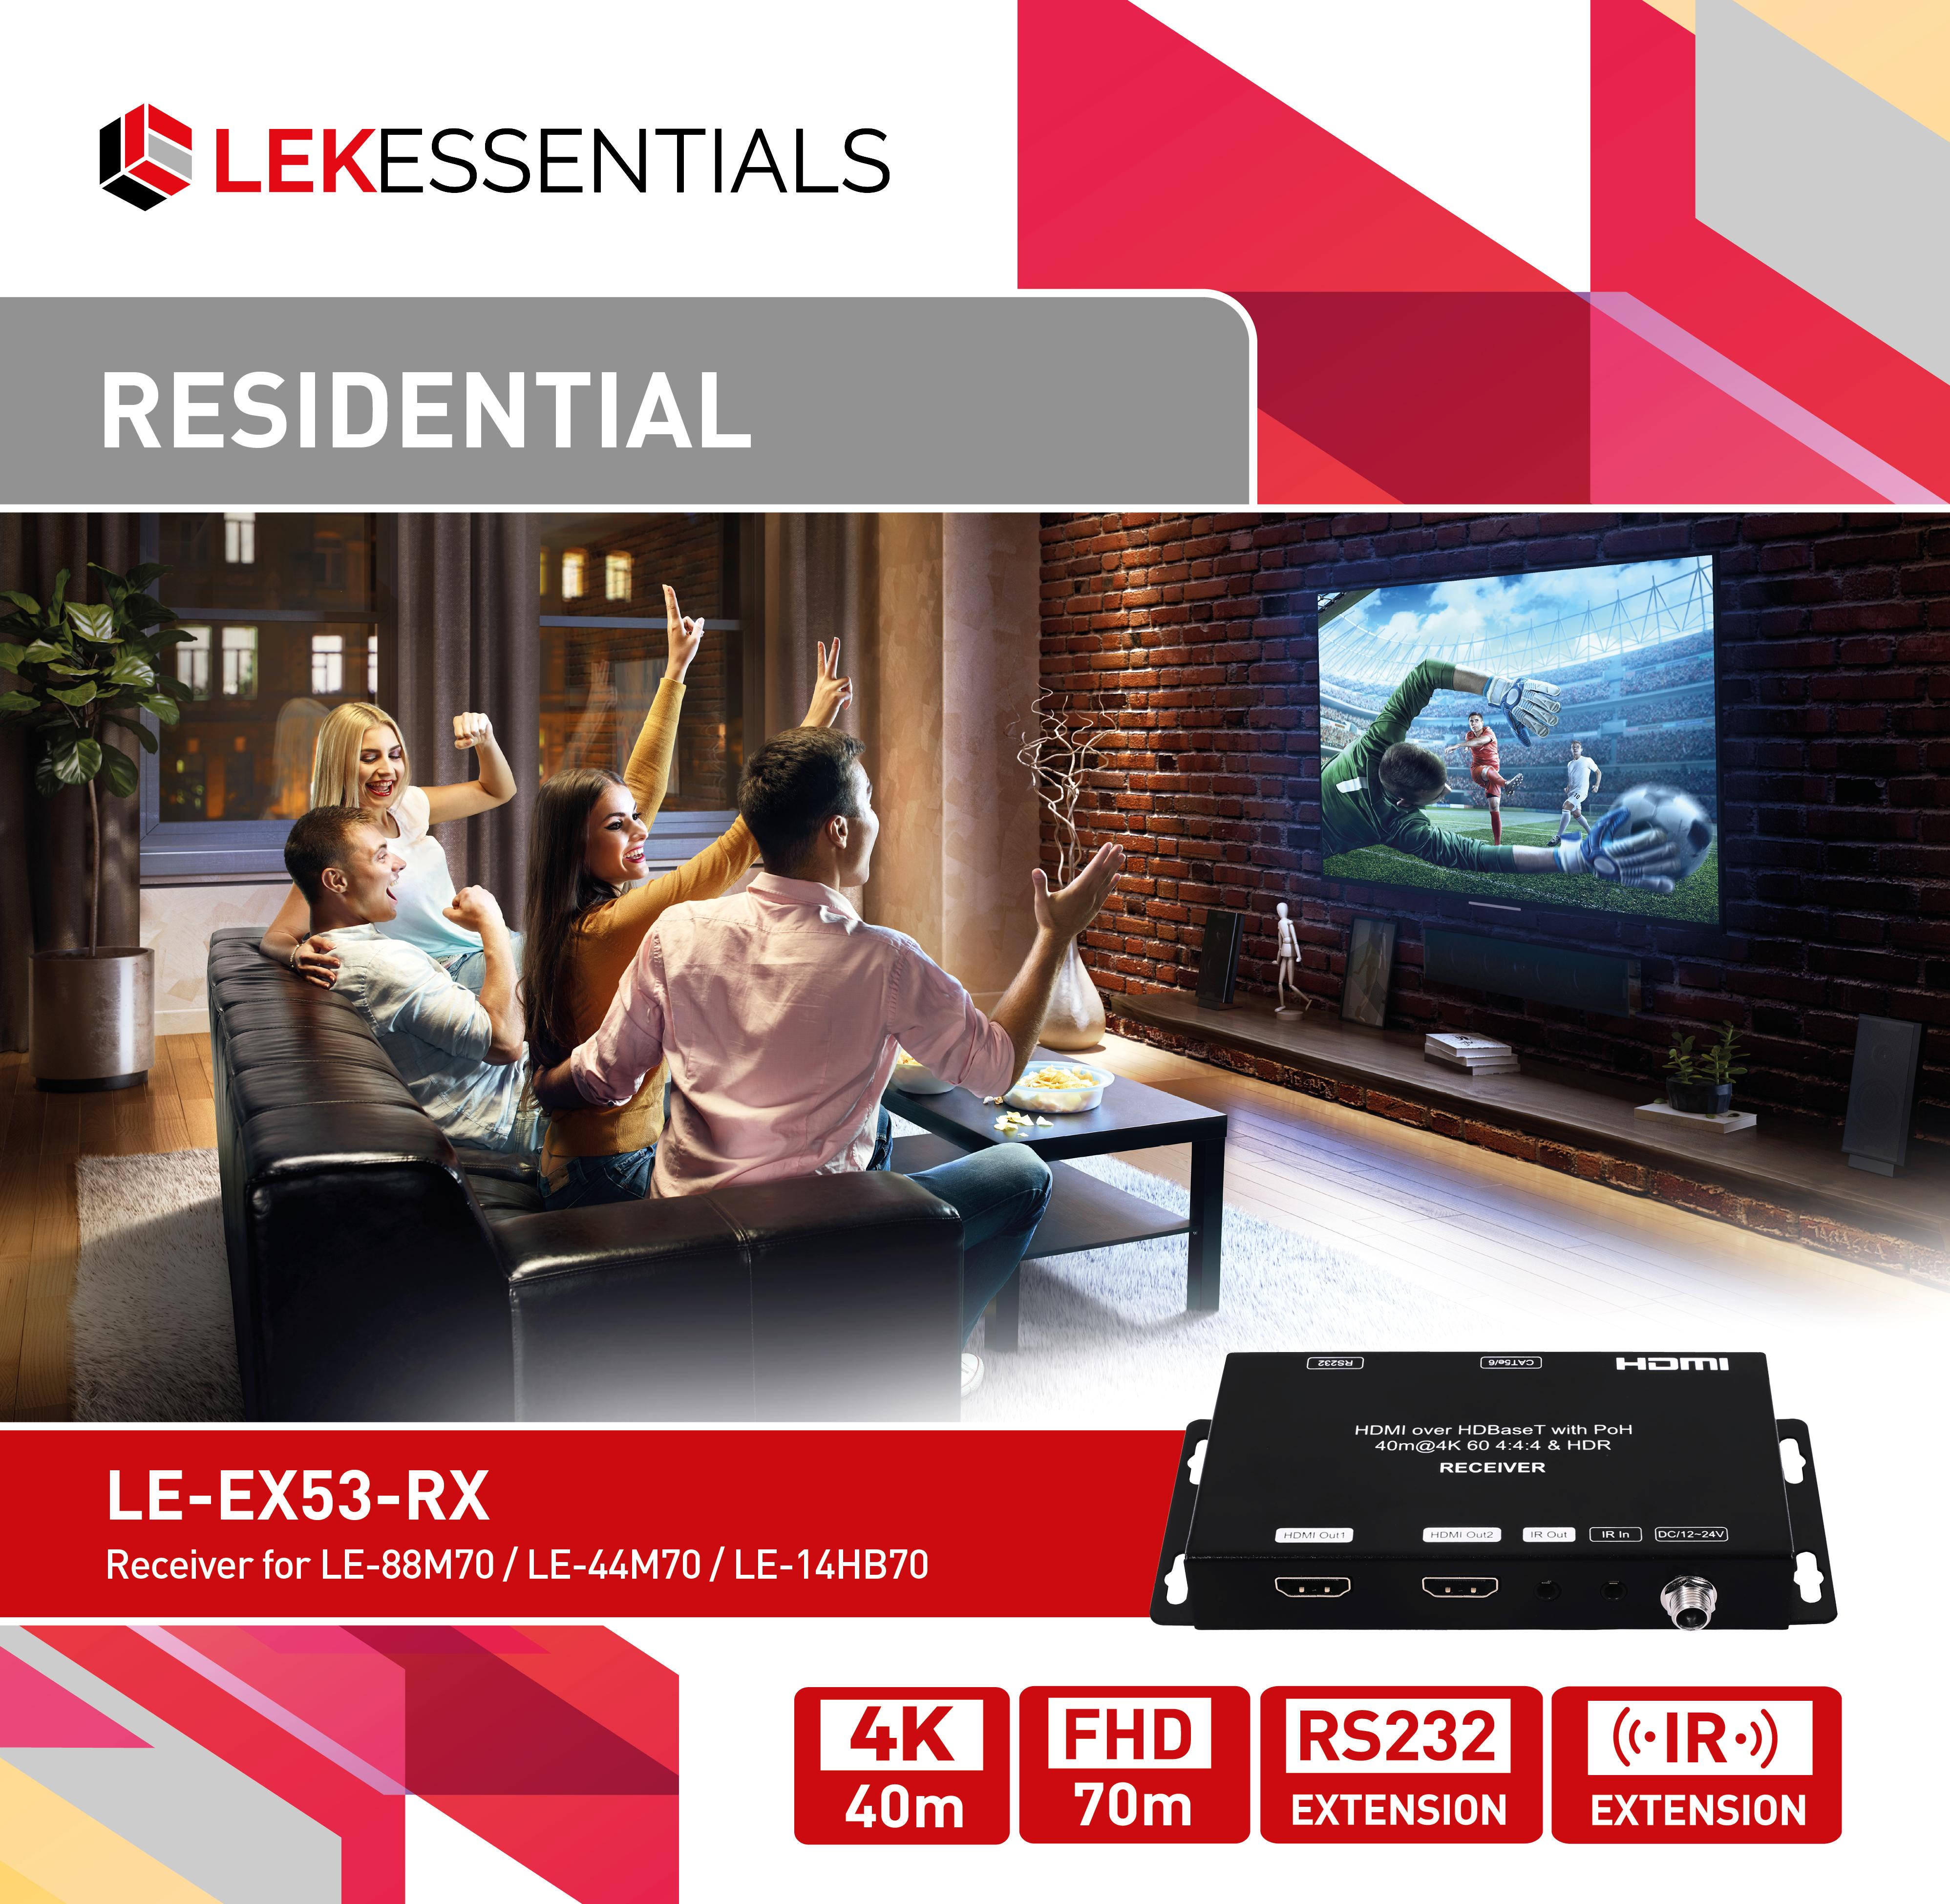 LE-EX53-RX Residential